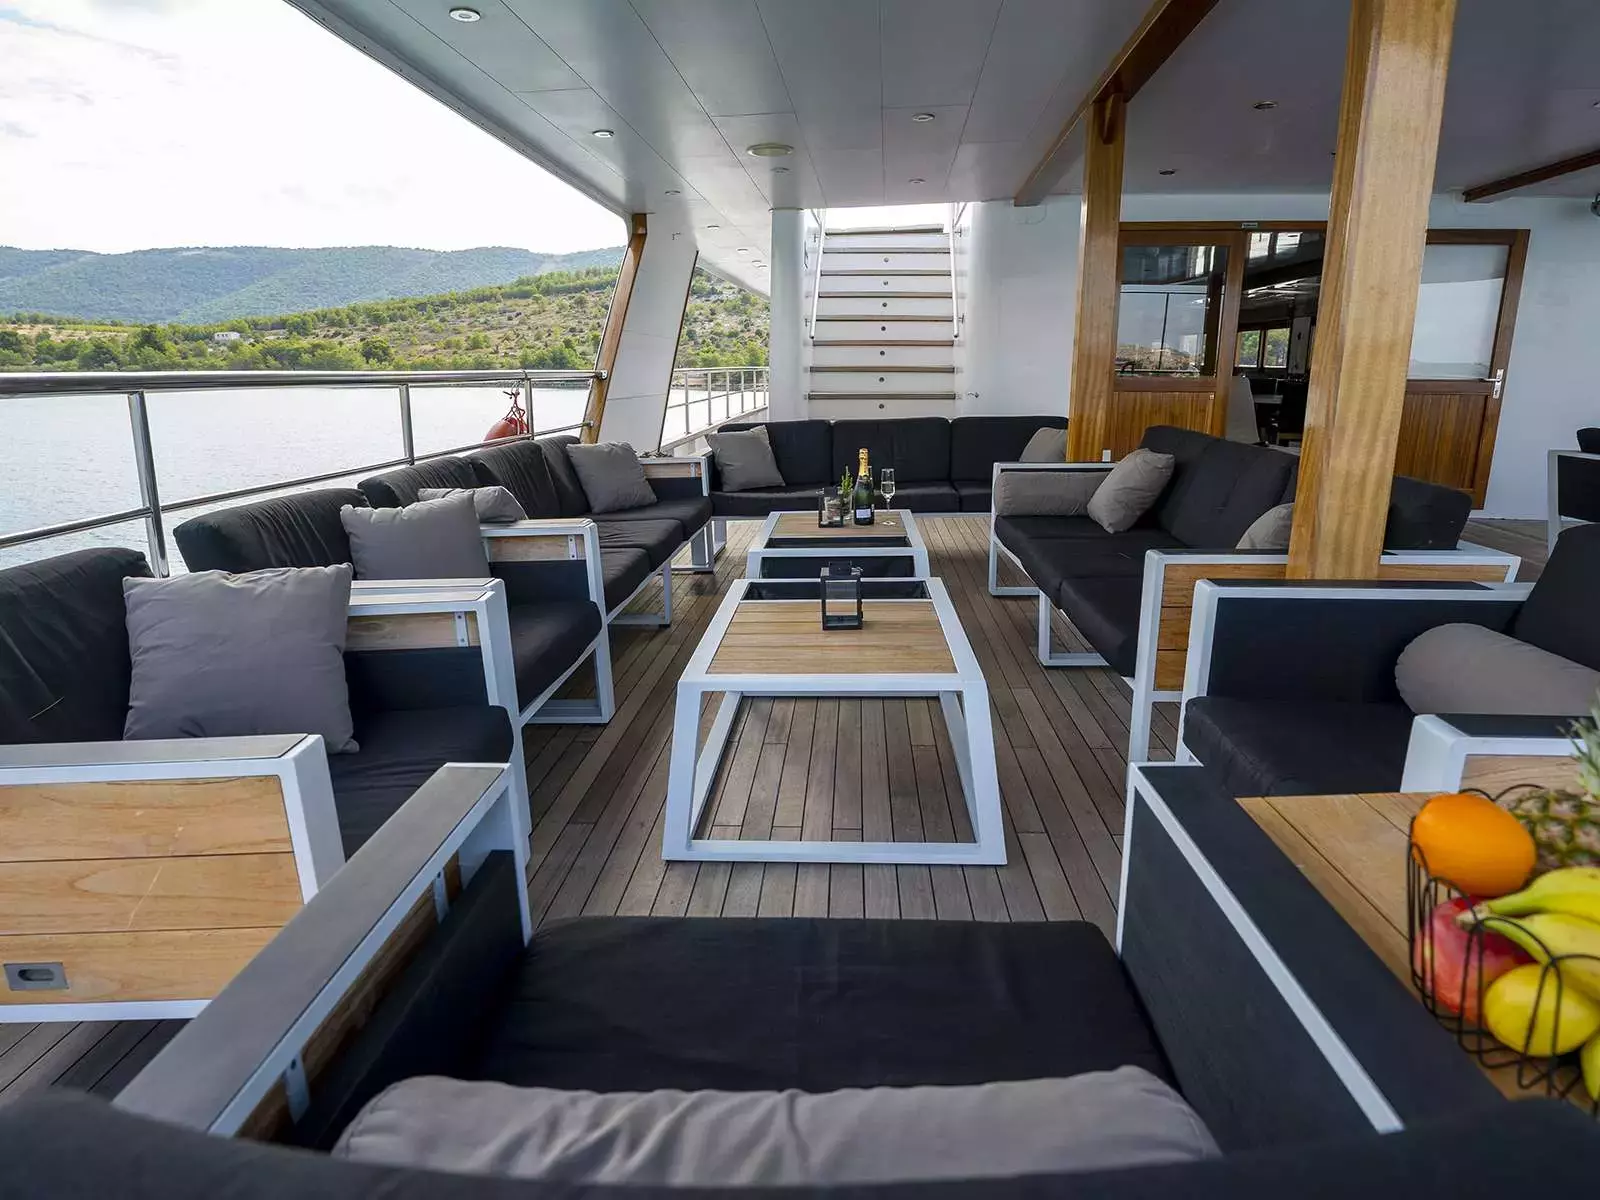 Karizma by Custom Made - Special Offer for a private Motor Yacht Charter in Zadar with a crew